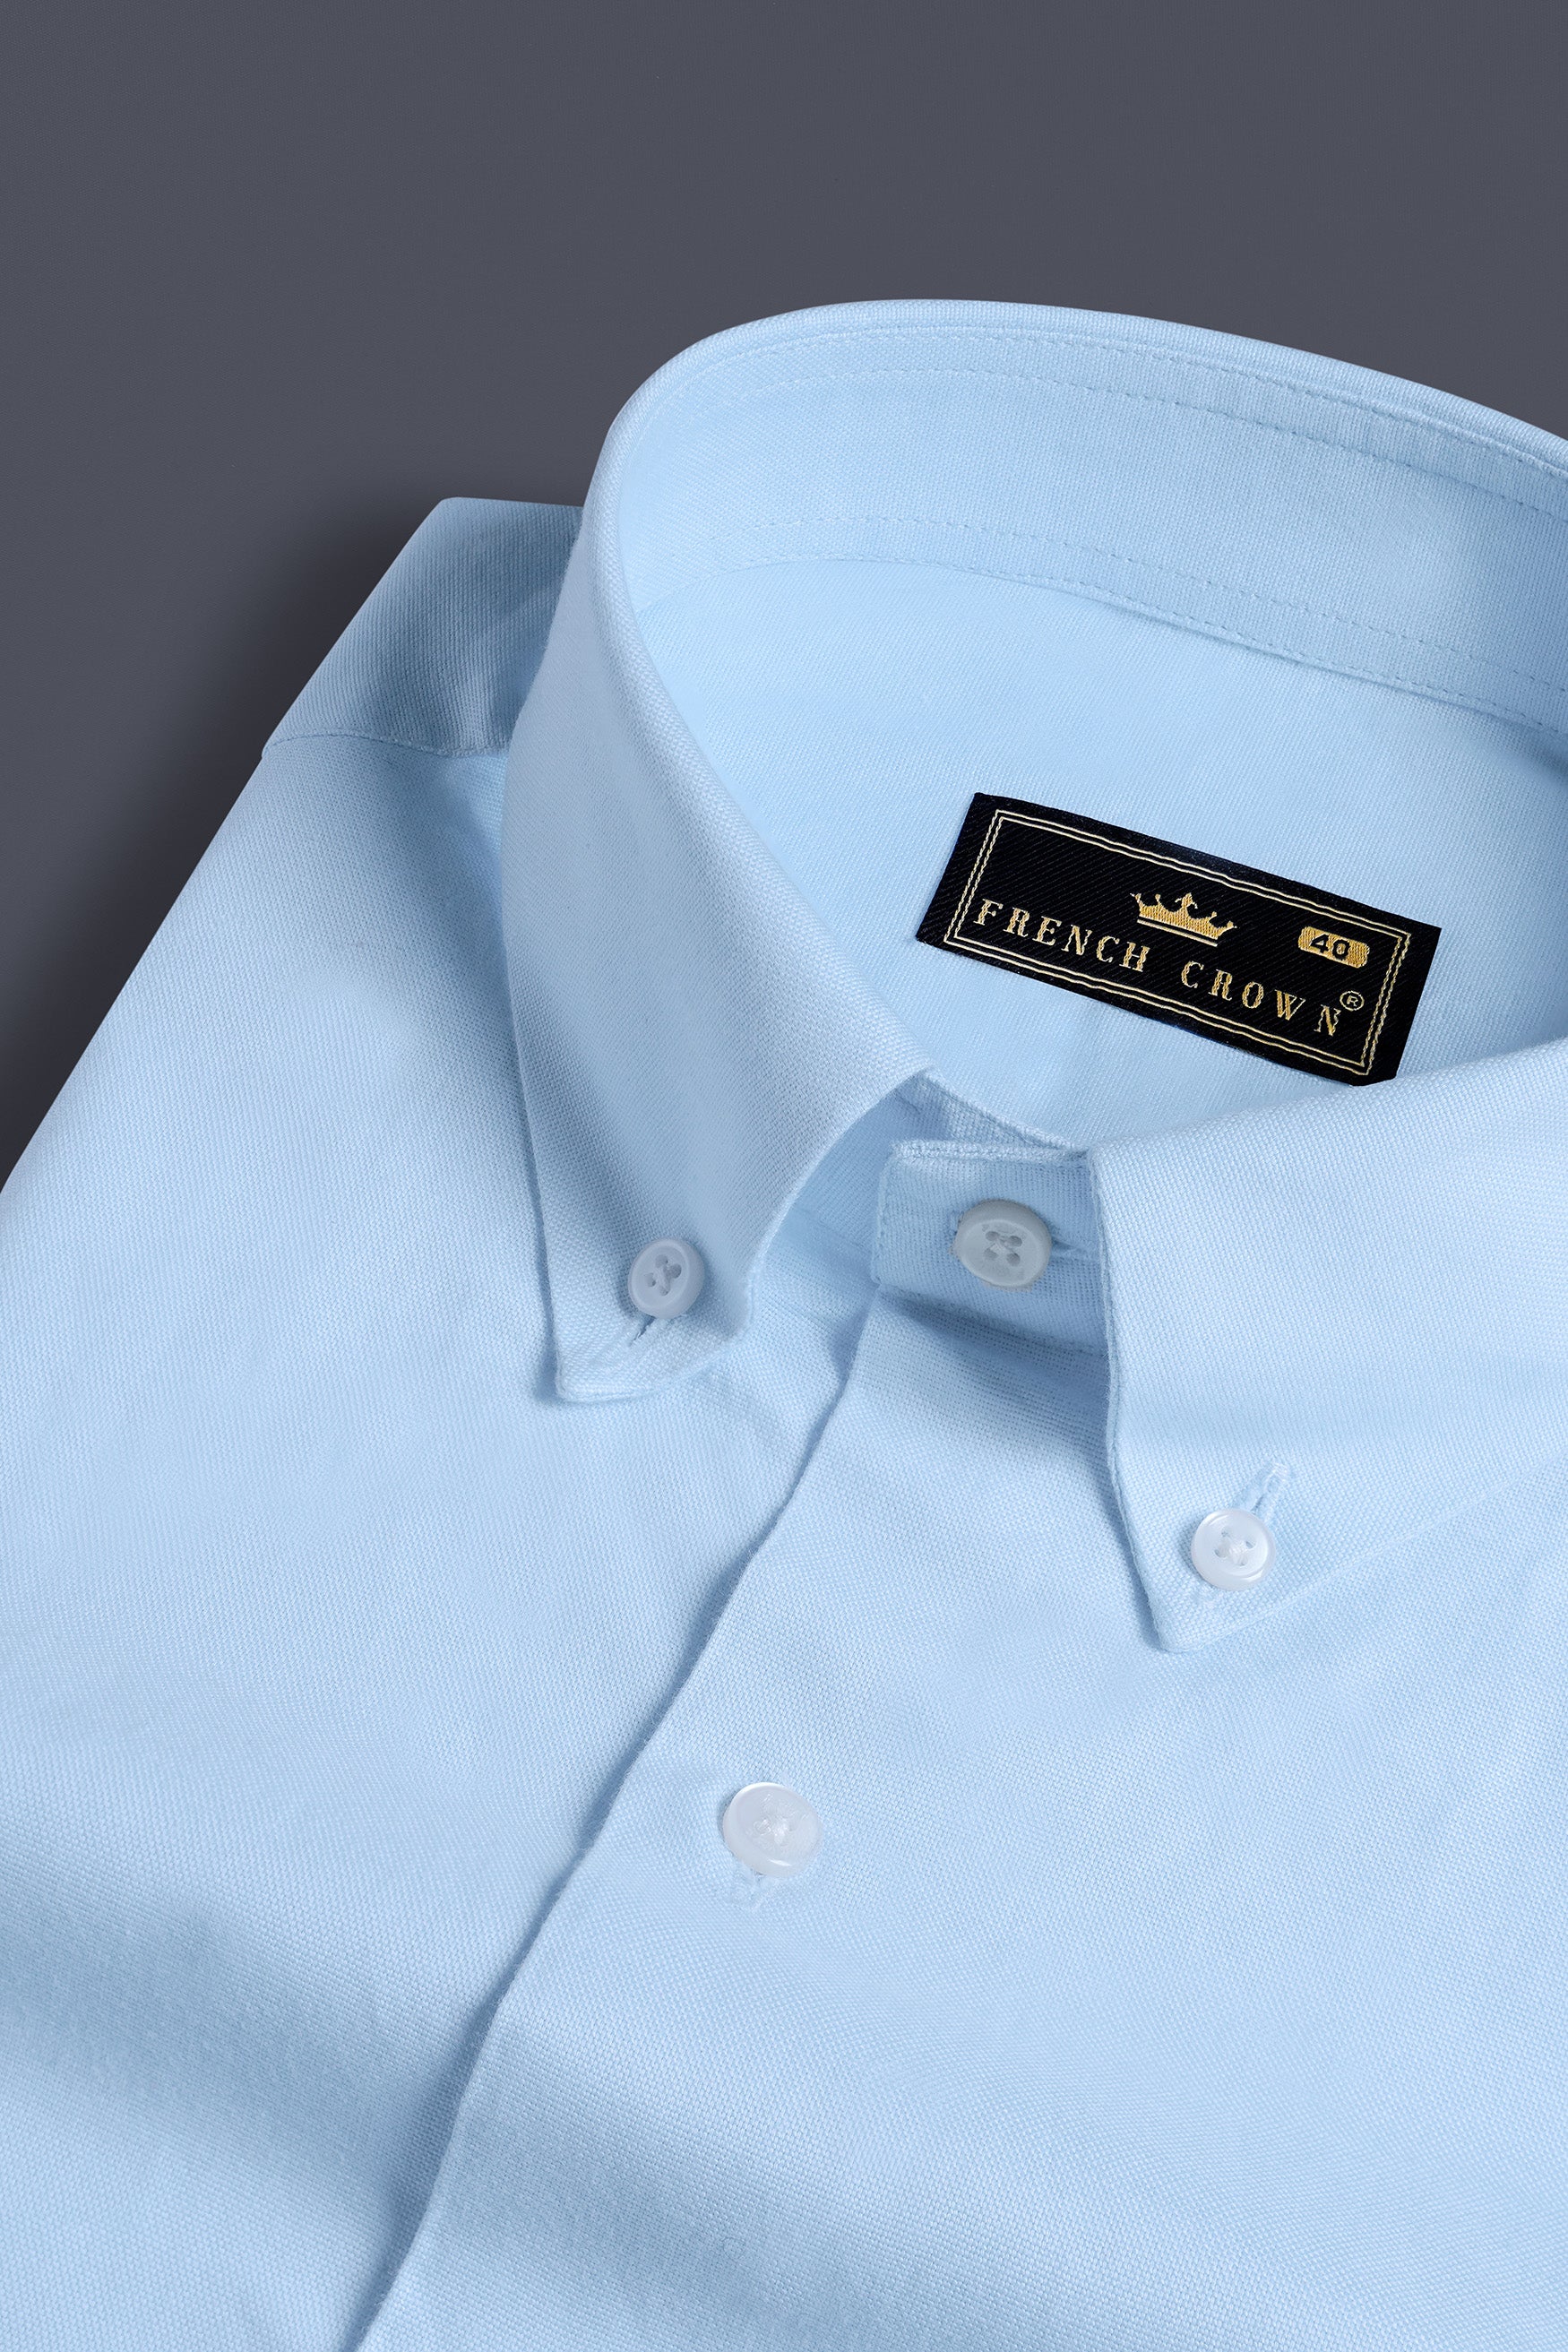 Spindle Blue Royal Oxford Button Down Shirt